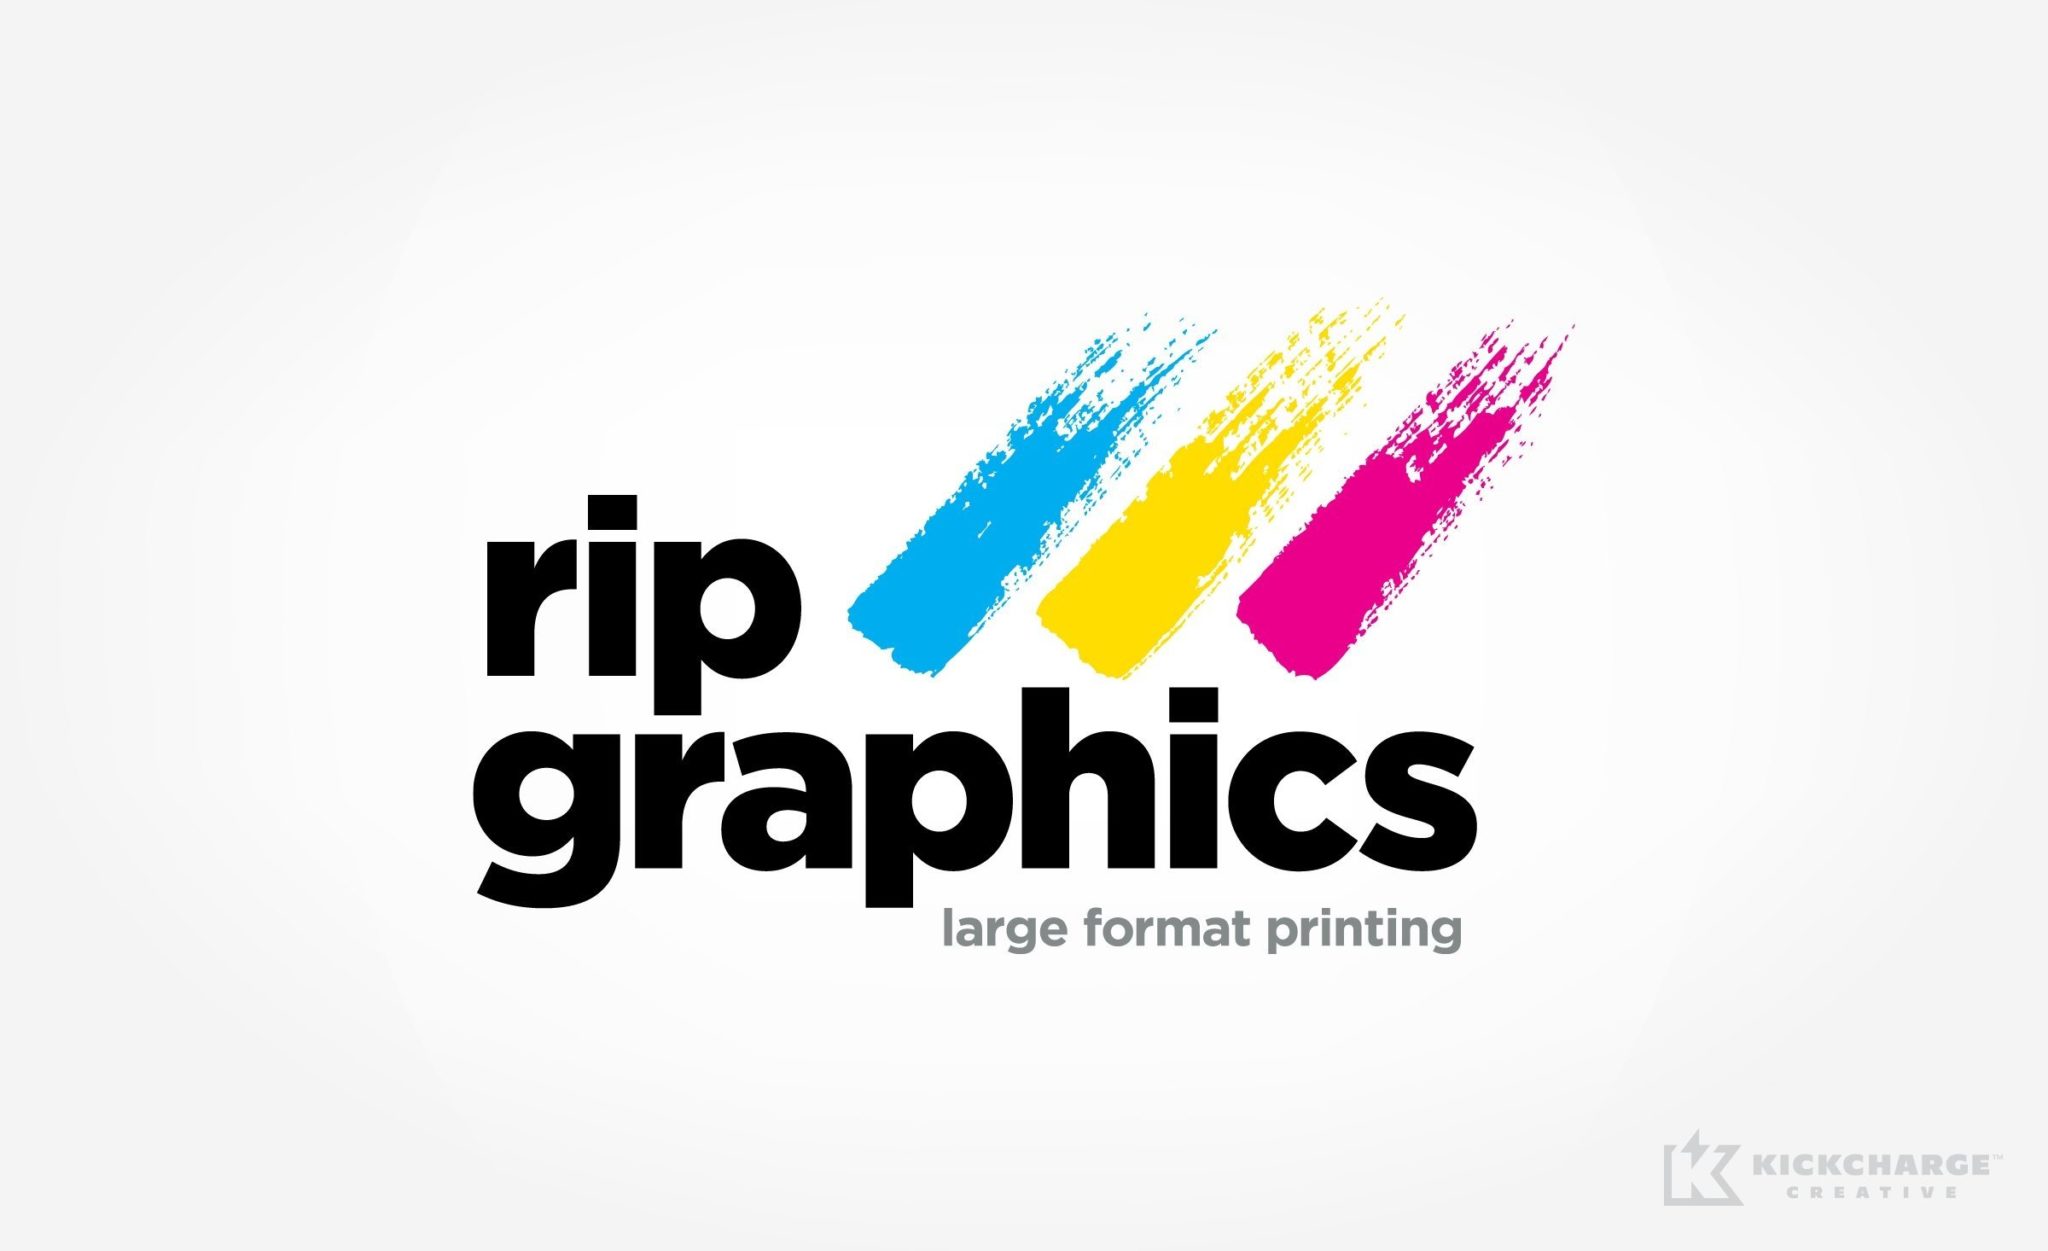 Logo and branding for a Sydney Australia based large format printing and signage company specializing in vehicle advertising.